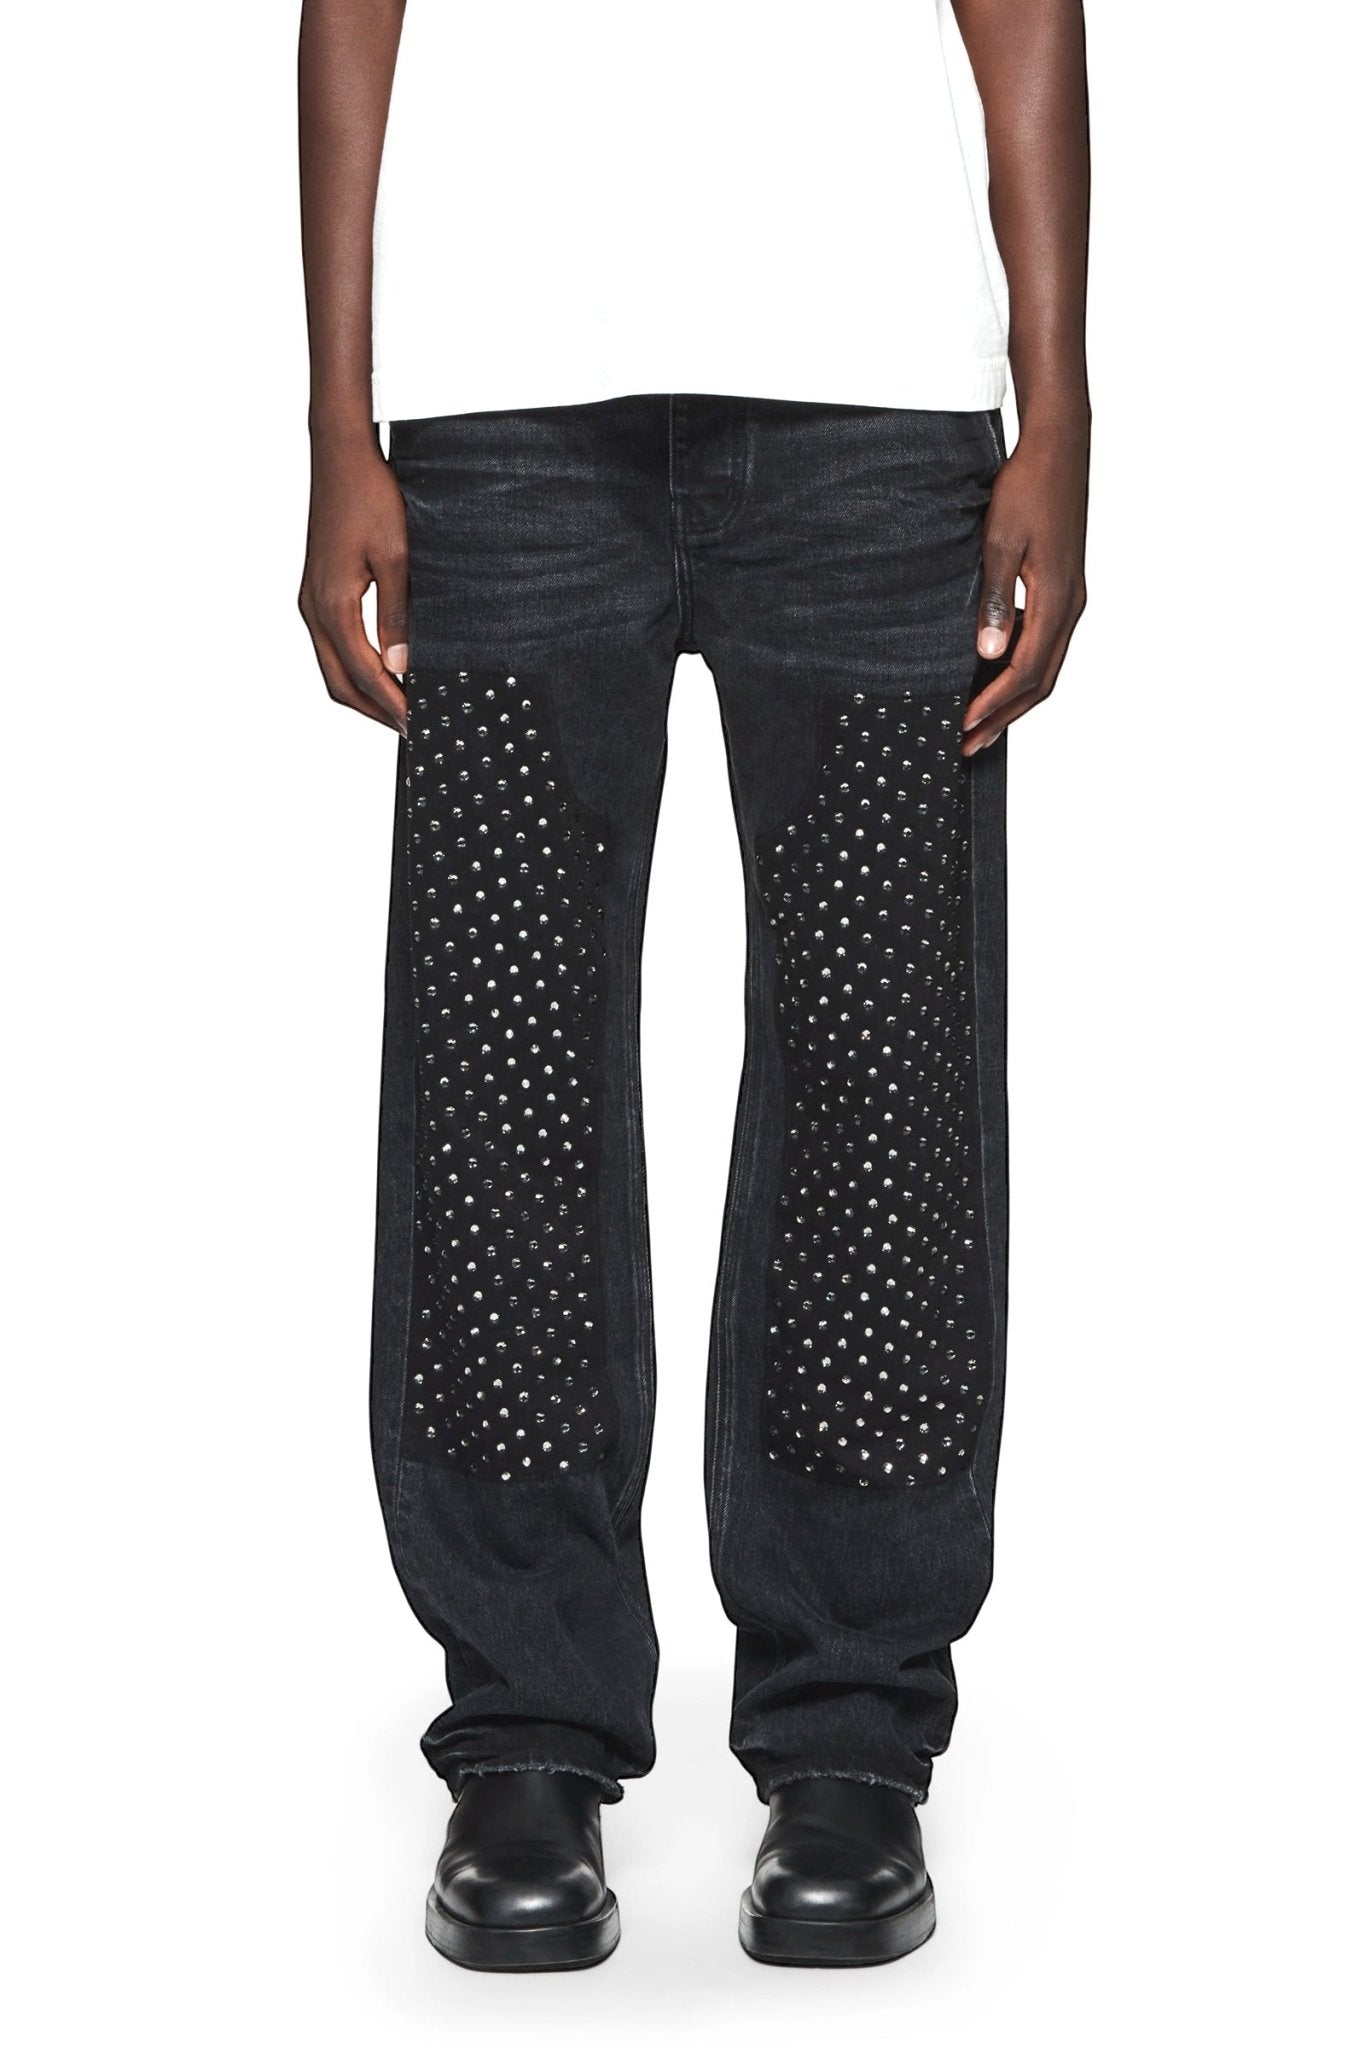 A man wearing a white t-shirt and PURPLE BRAND JEANS P015-CCBL CRYSTAL CARPENTER BLACK stretch denim jeans.